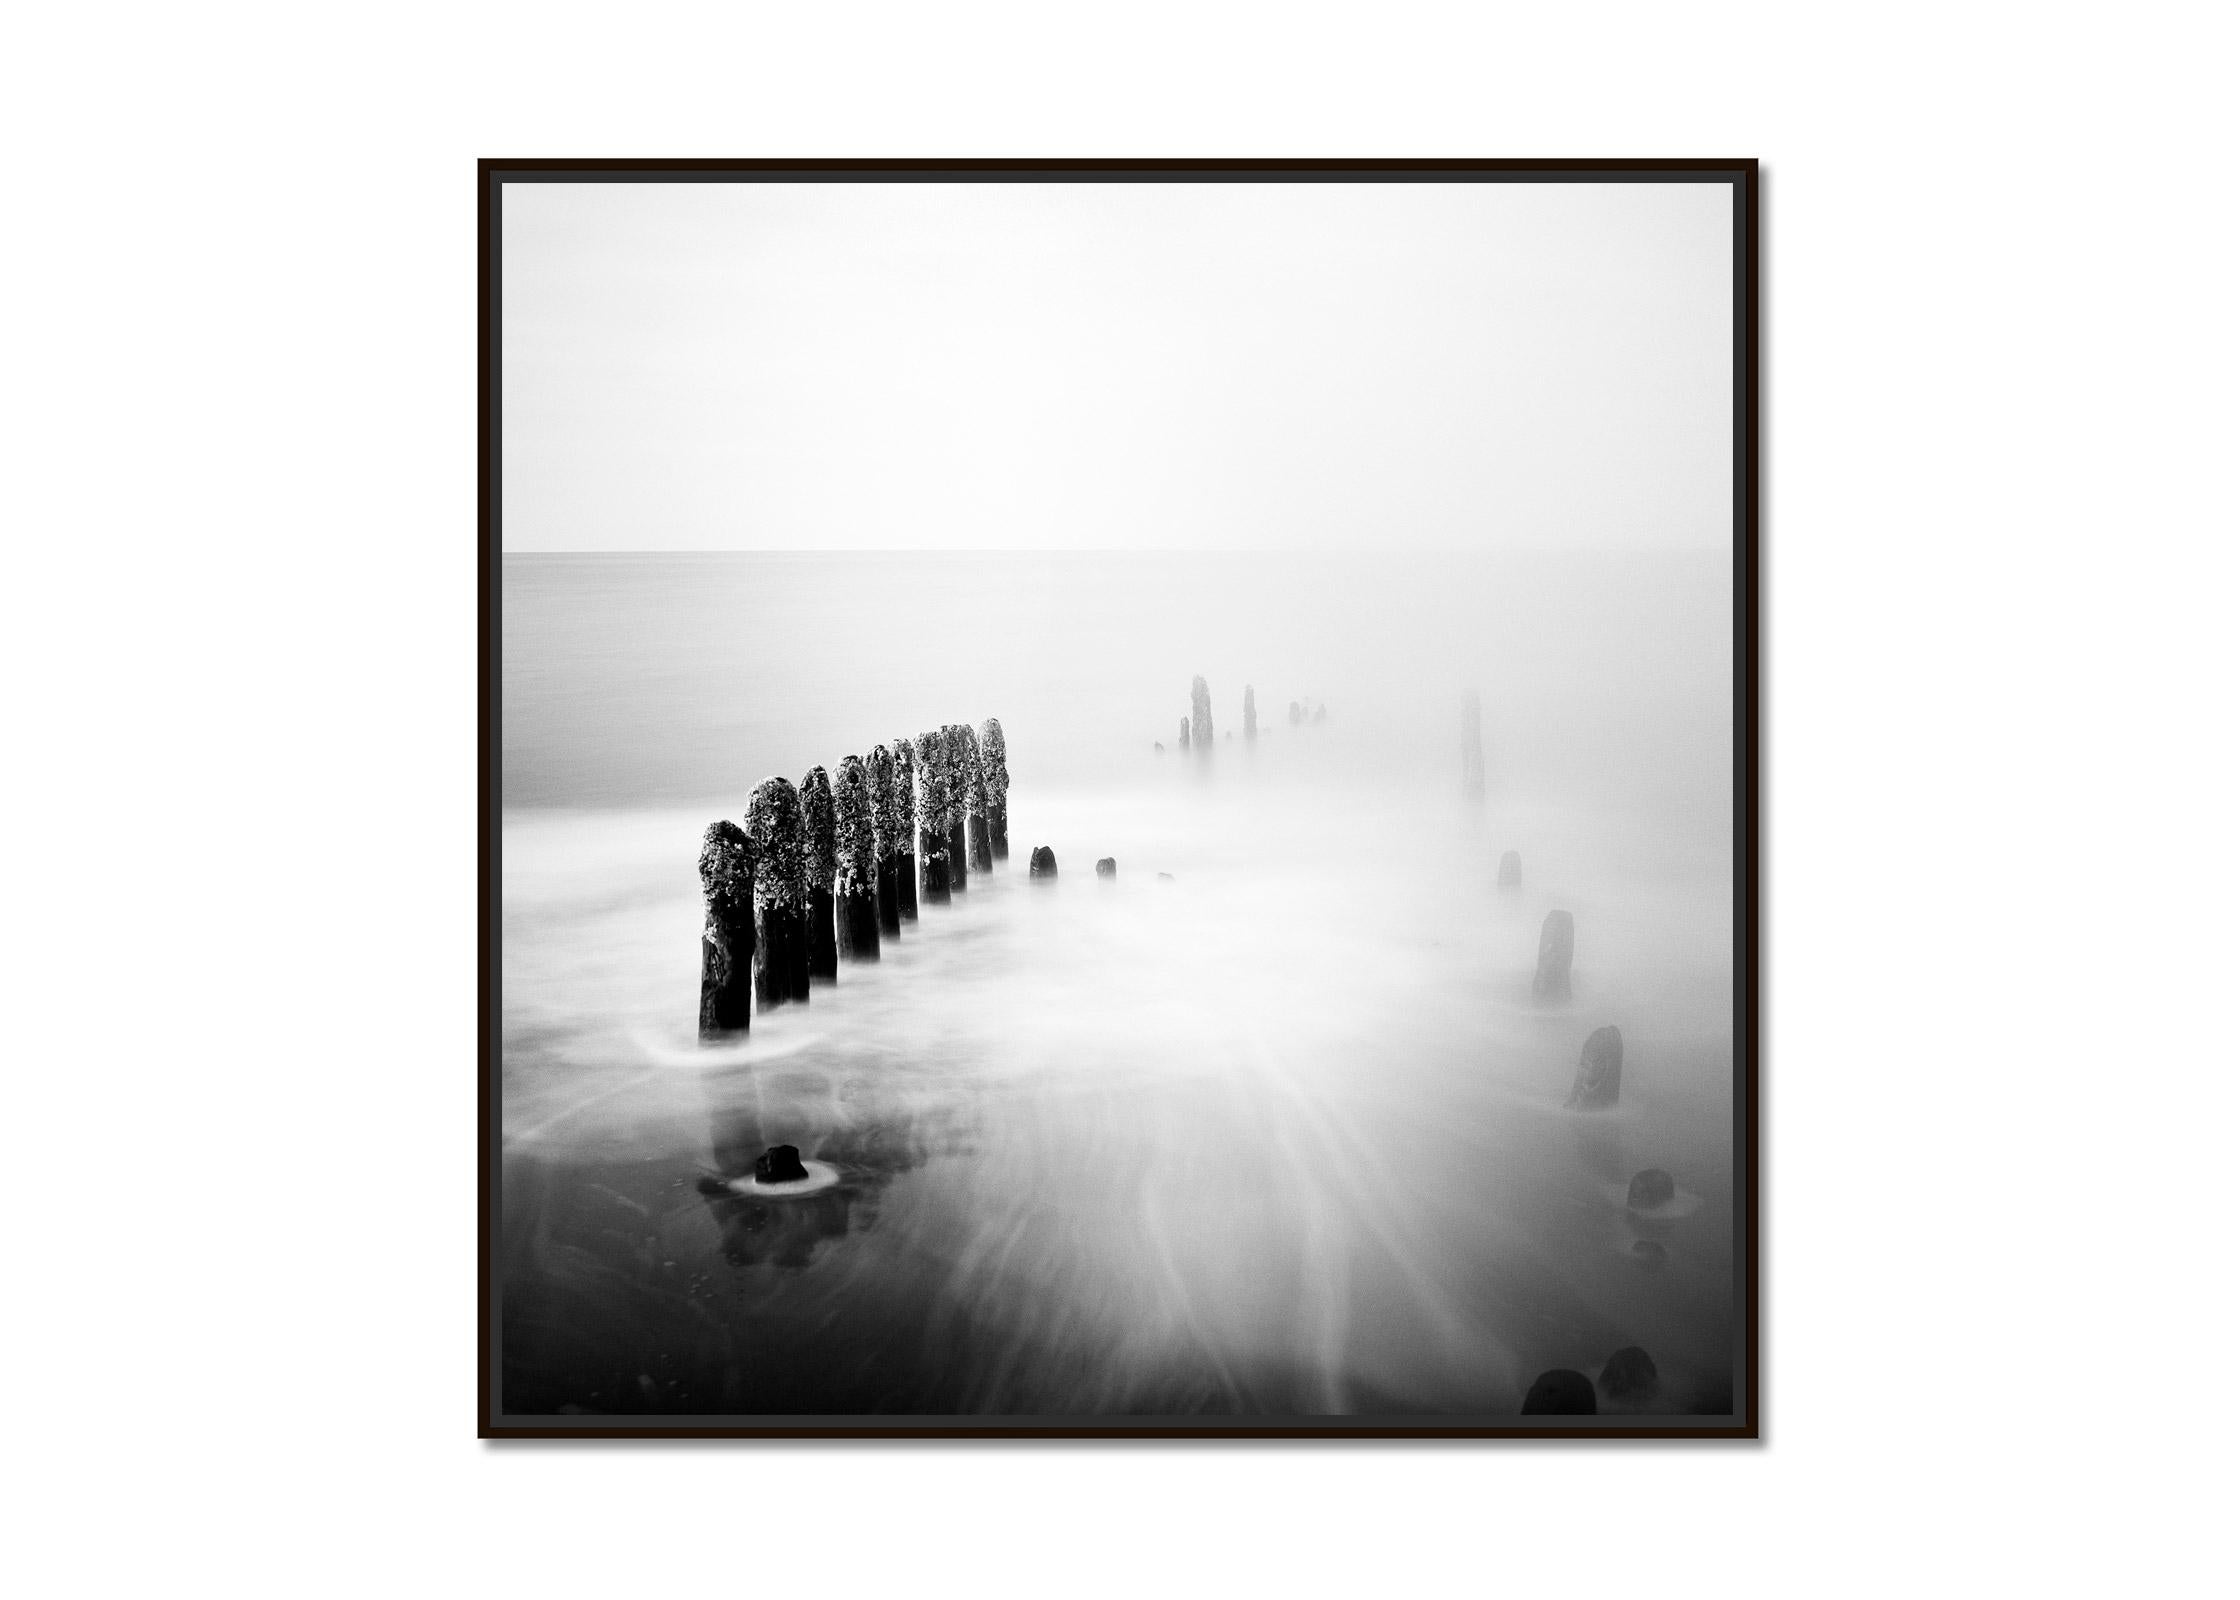 Asparagus Time, Ruegen, Germany, minimalist, black and white landscape art print - Photograph by Gerald Berghammer